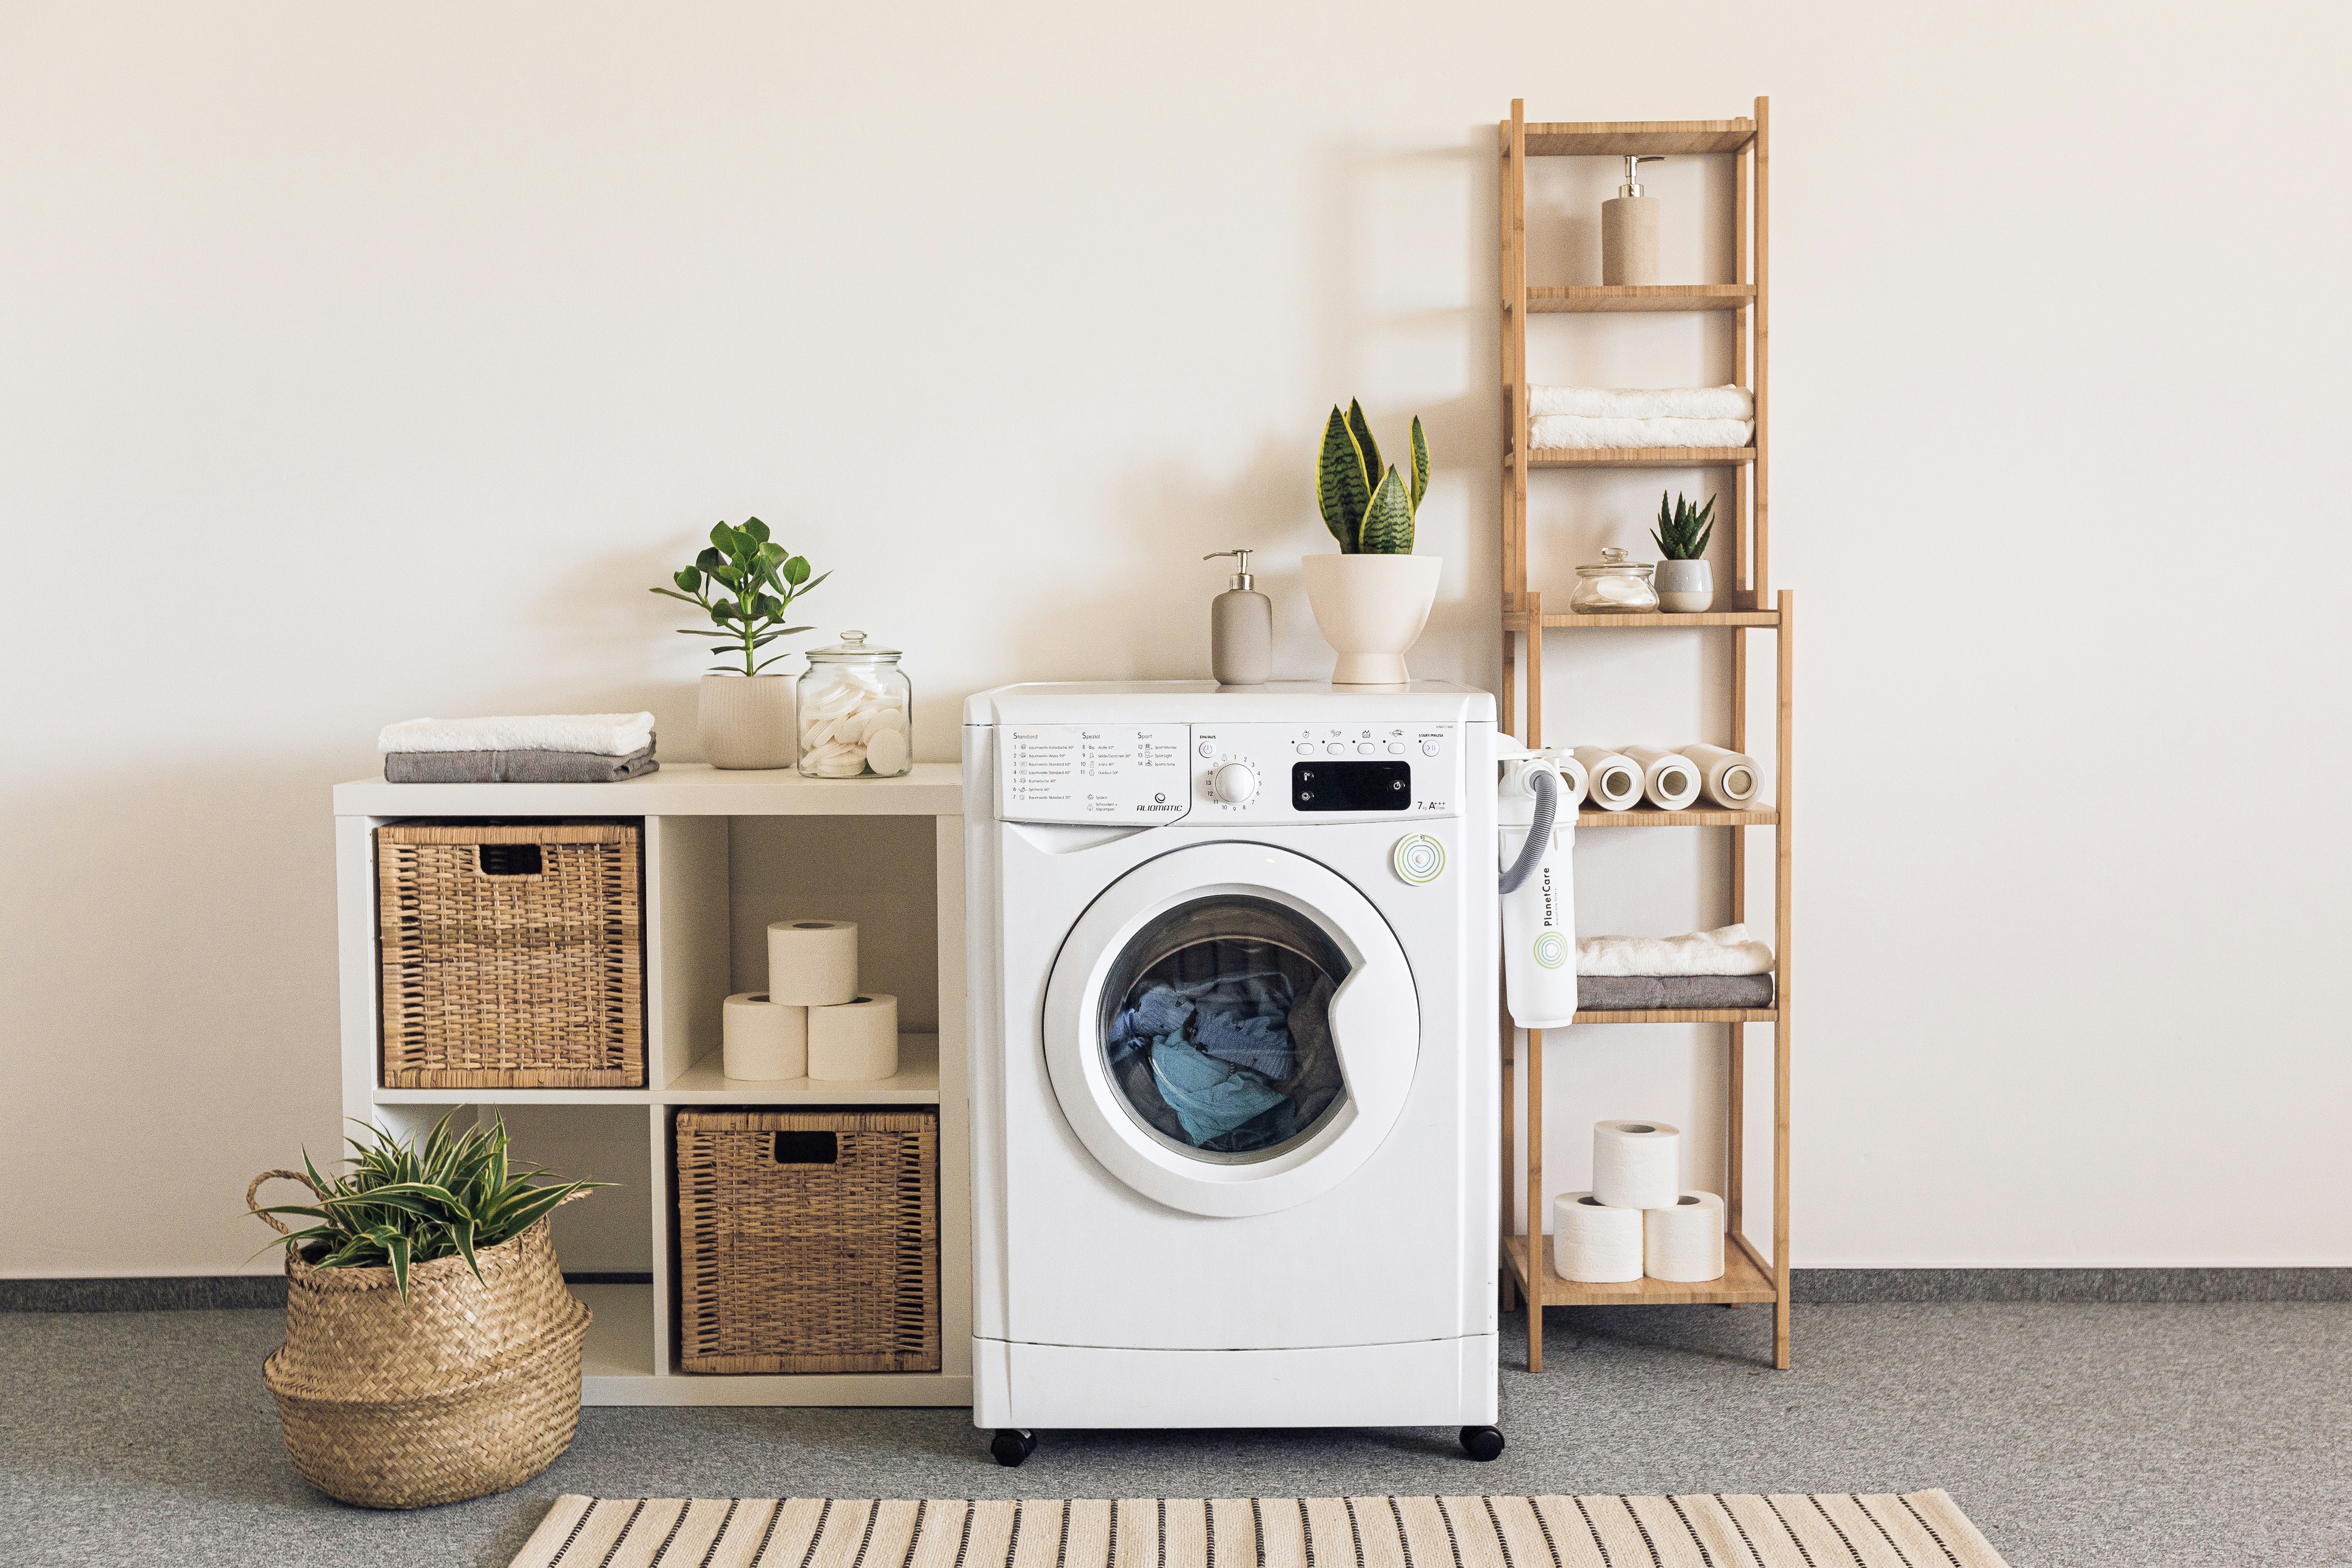  an image of a laundry room